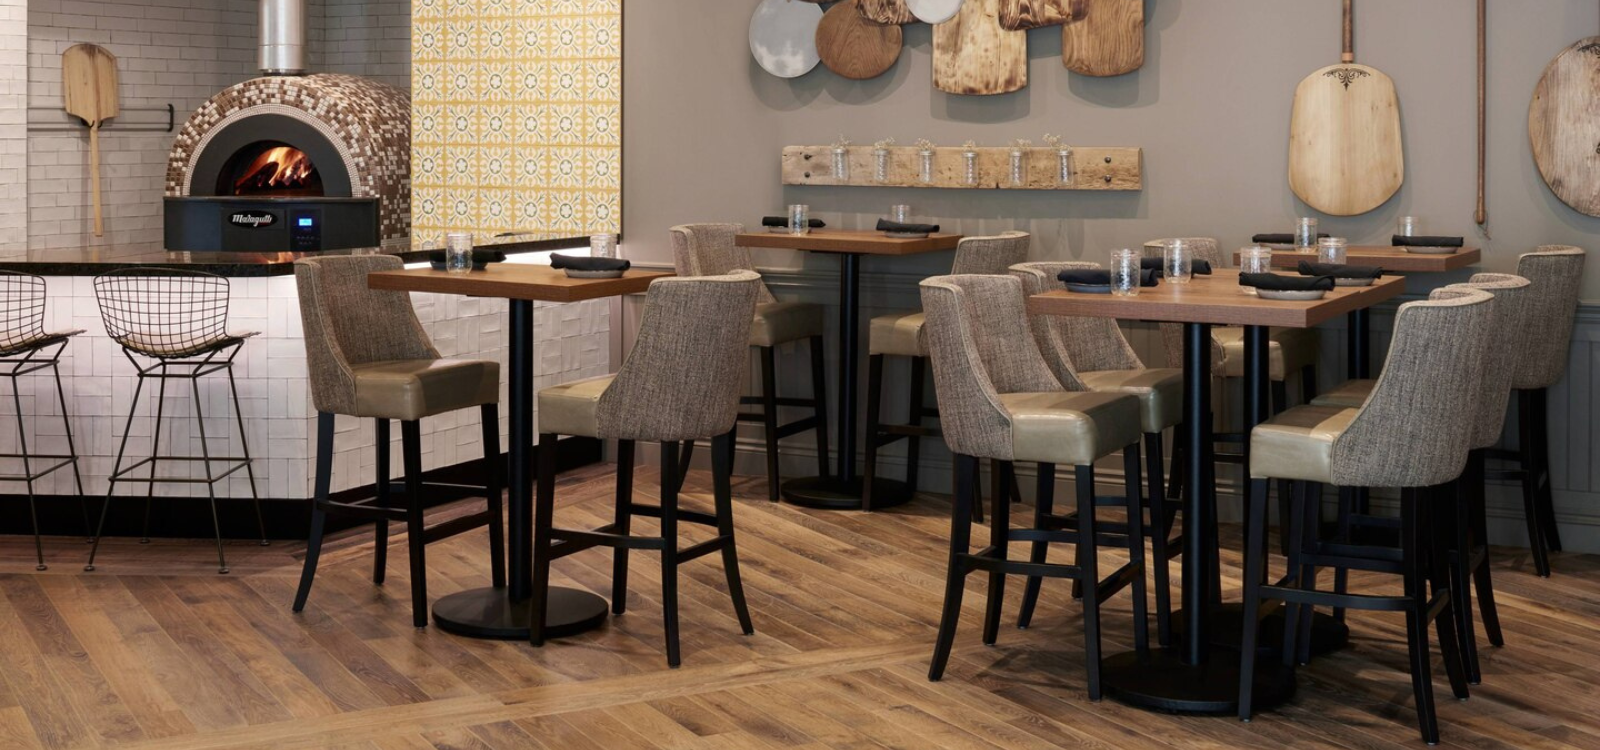 Where and how can I buy restaurant furniture in the Canada